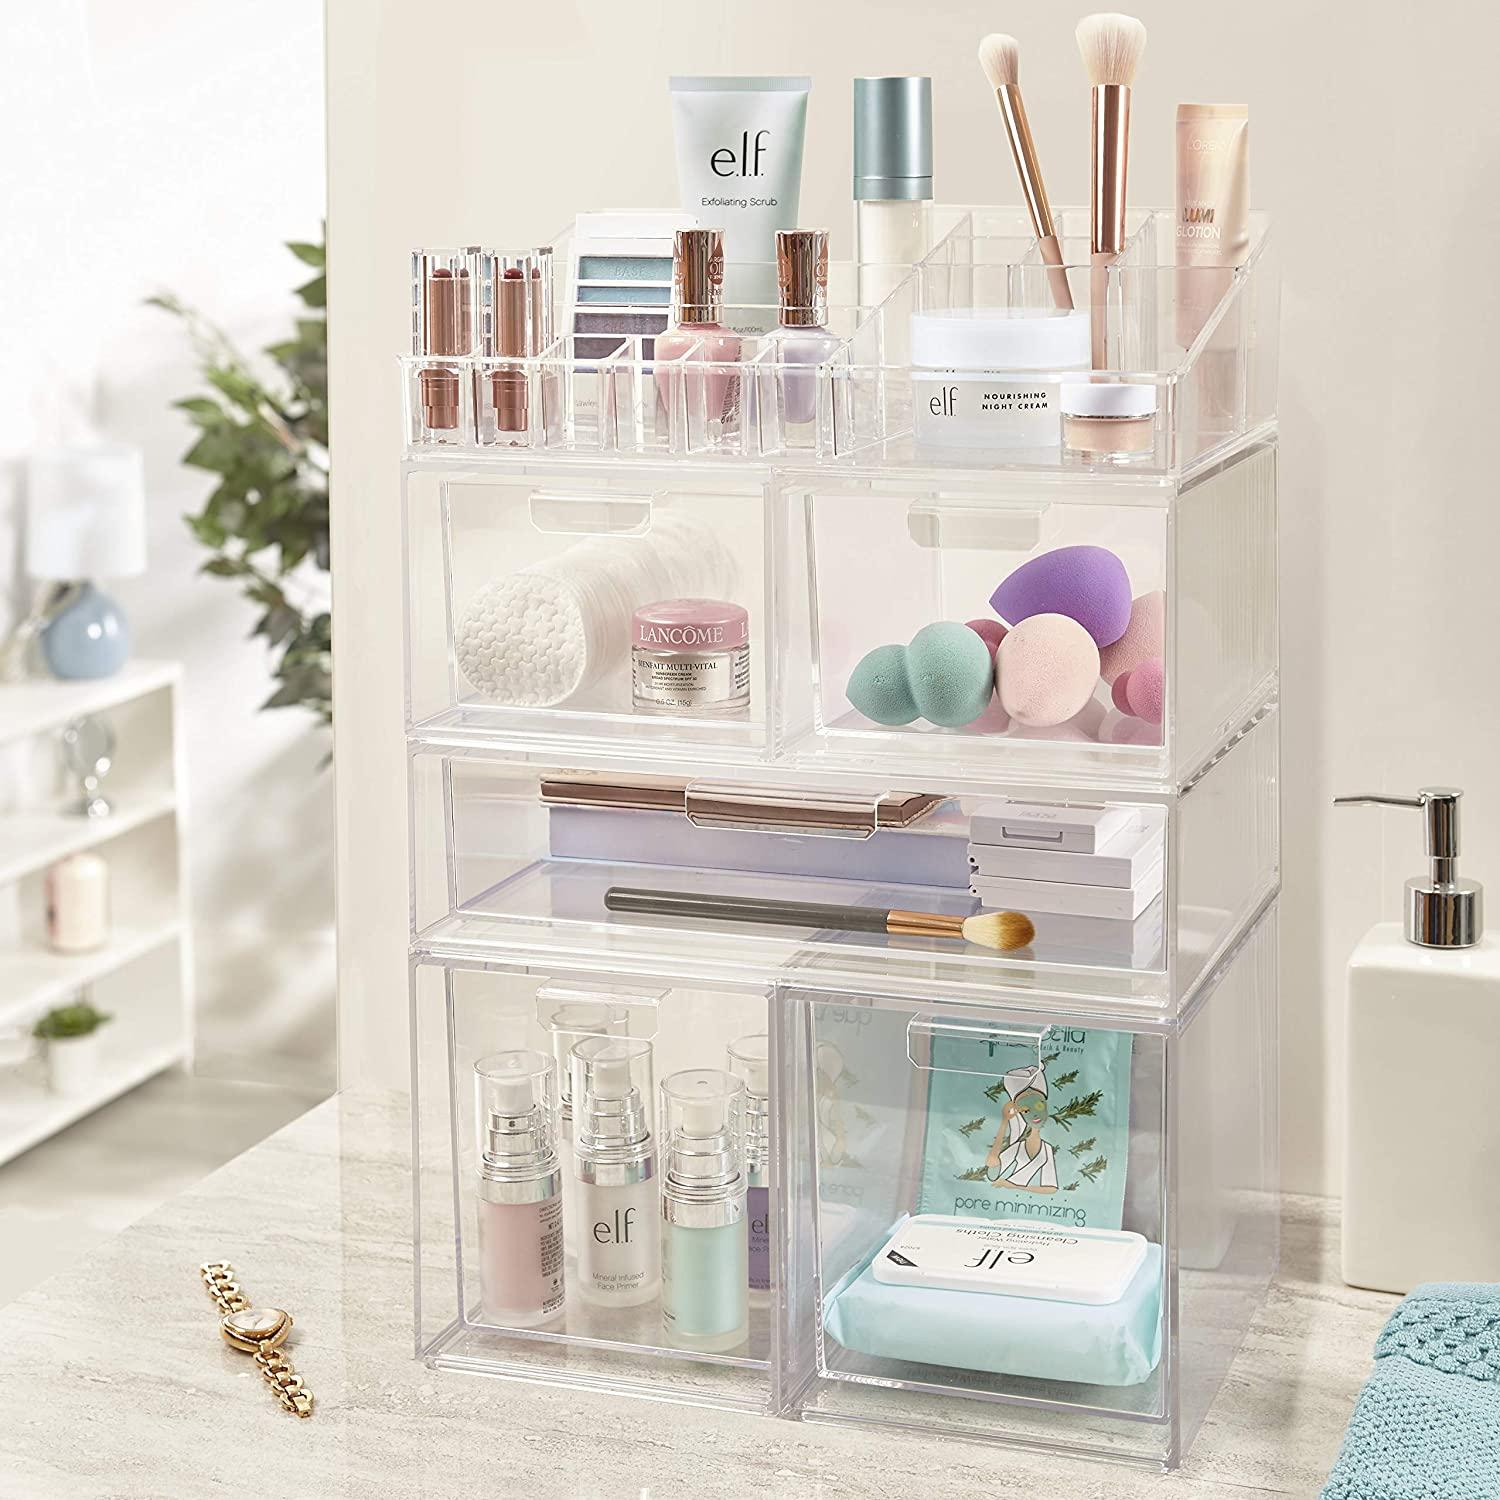 STORi STORi Audrey Stackable Clear Bin Plastic Organizer Drawers, 2 Piece  Set, Organize Cosmetics and Beauty Supplies on a Vanity, Made in USA UAE